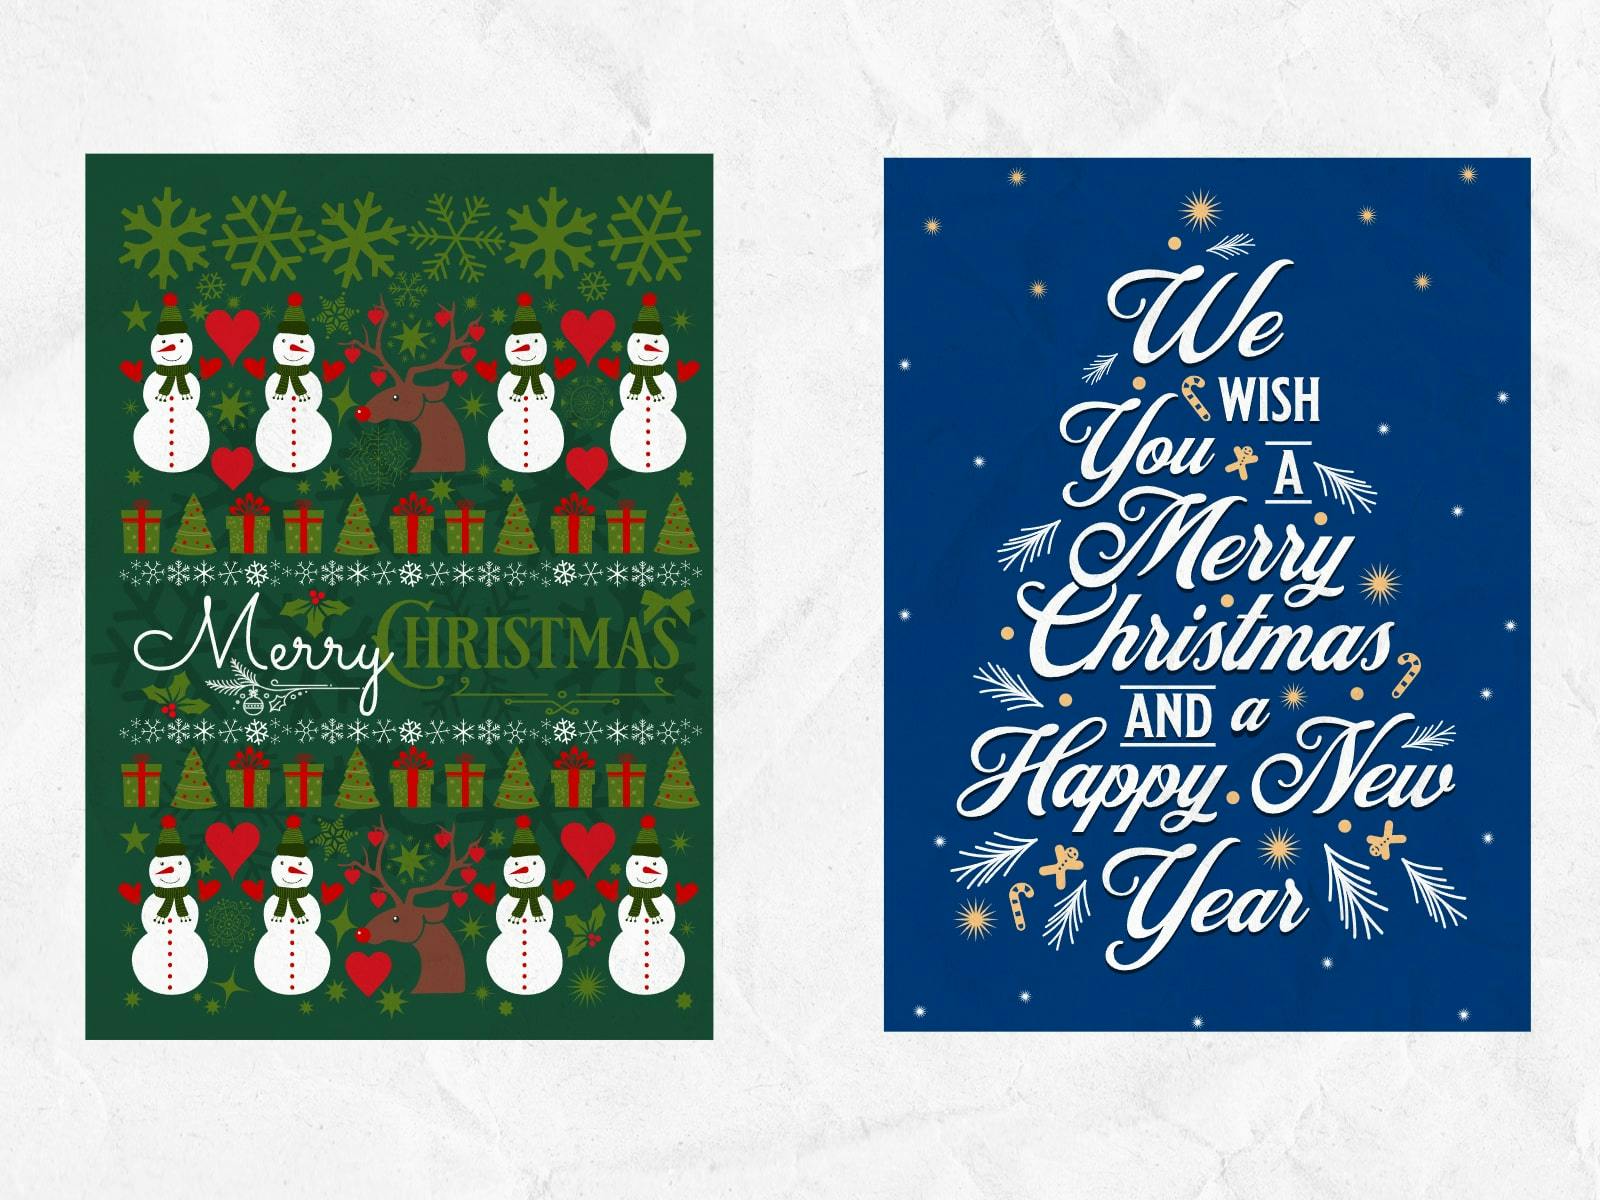 Personal Christmas Greeting Card: Collection of personal Christmas greeting cards